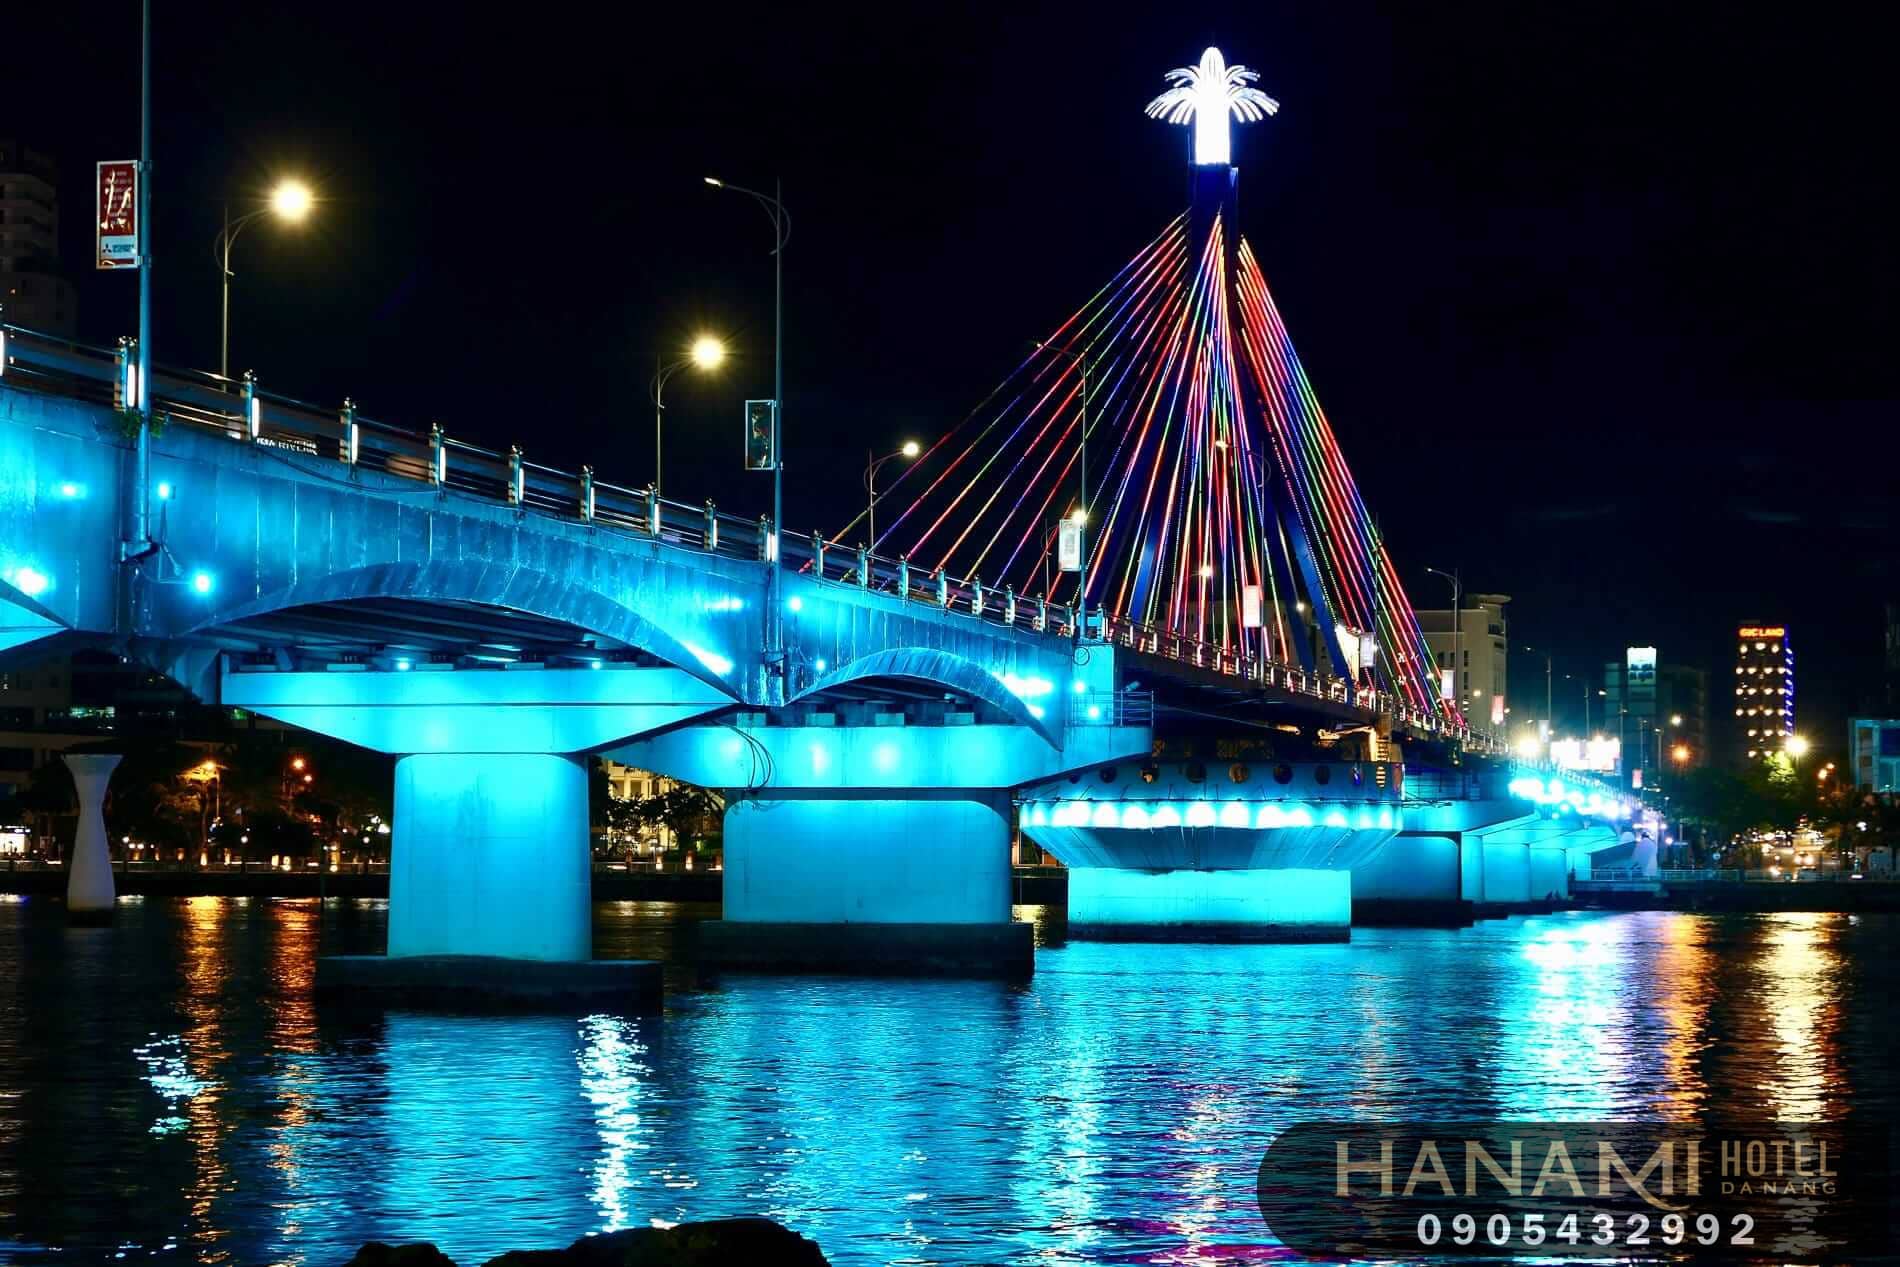 what to do in danang city